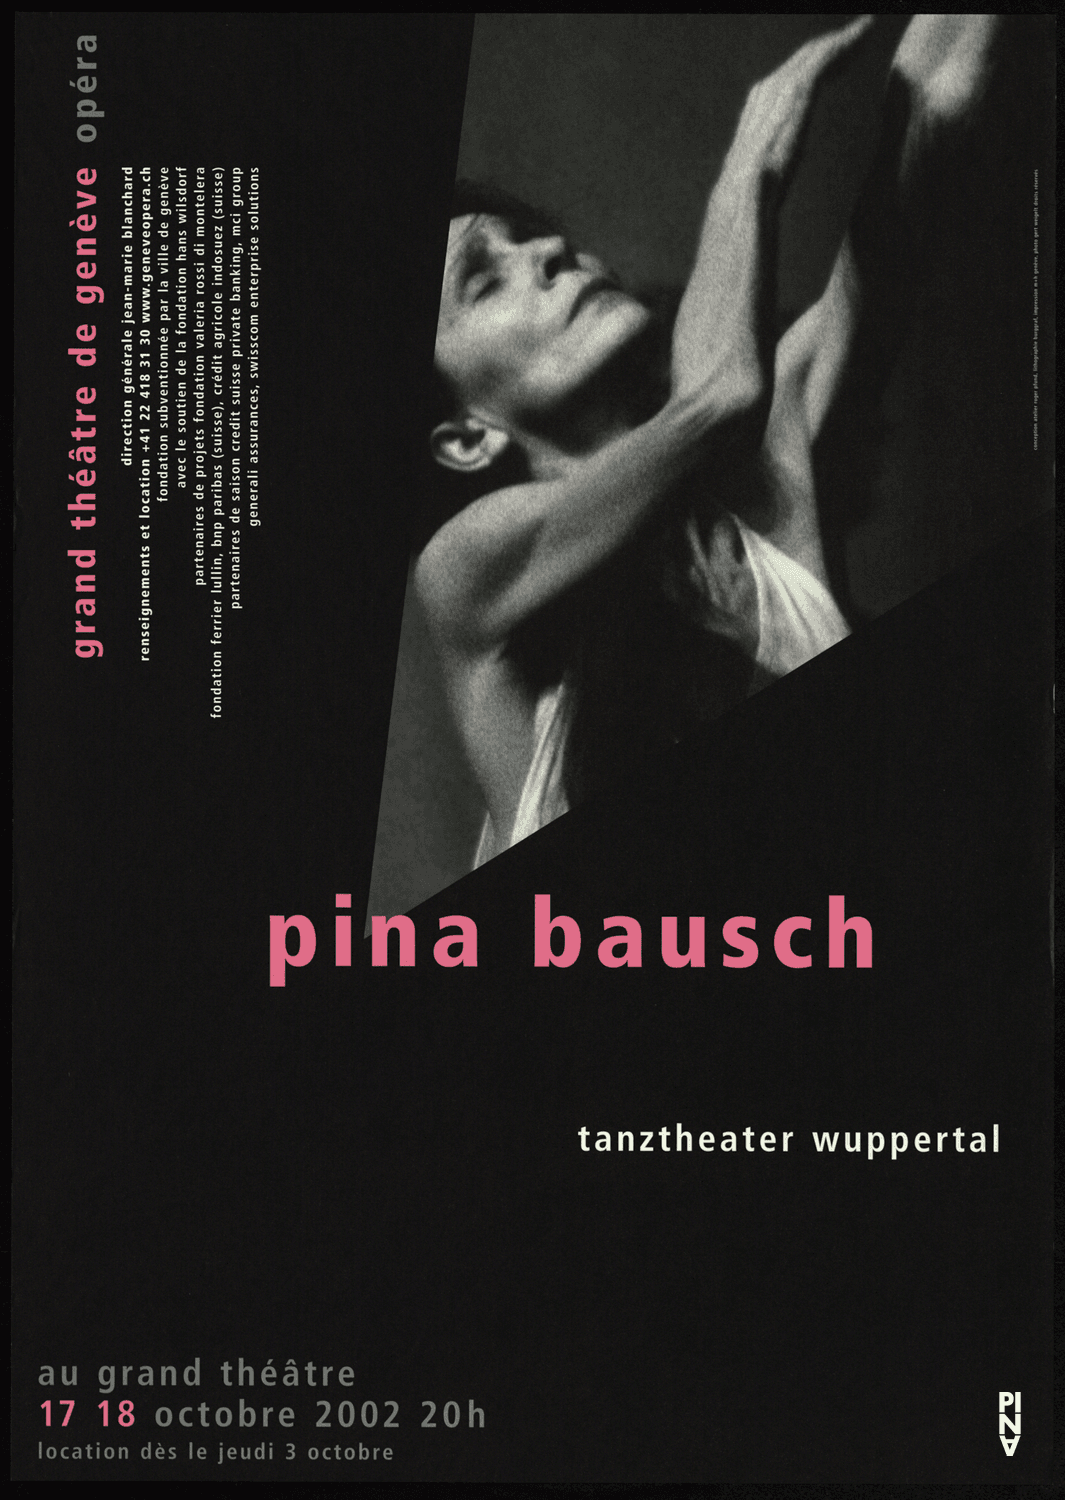 Poster for “Café Müller” and “The Rite of Spring” by Pina Bausch in Geneva, 10/17/2002 – 10/18/2002